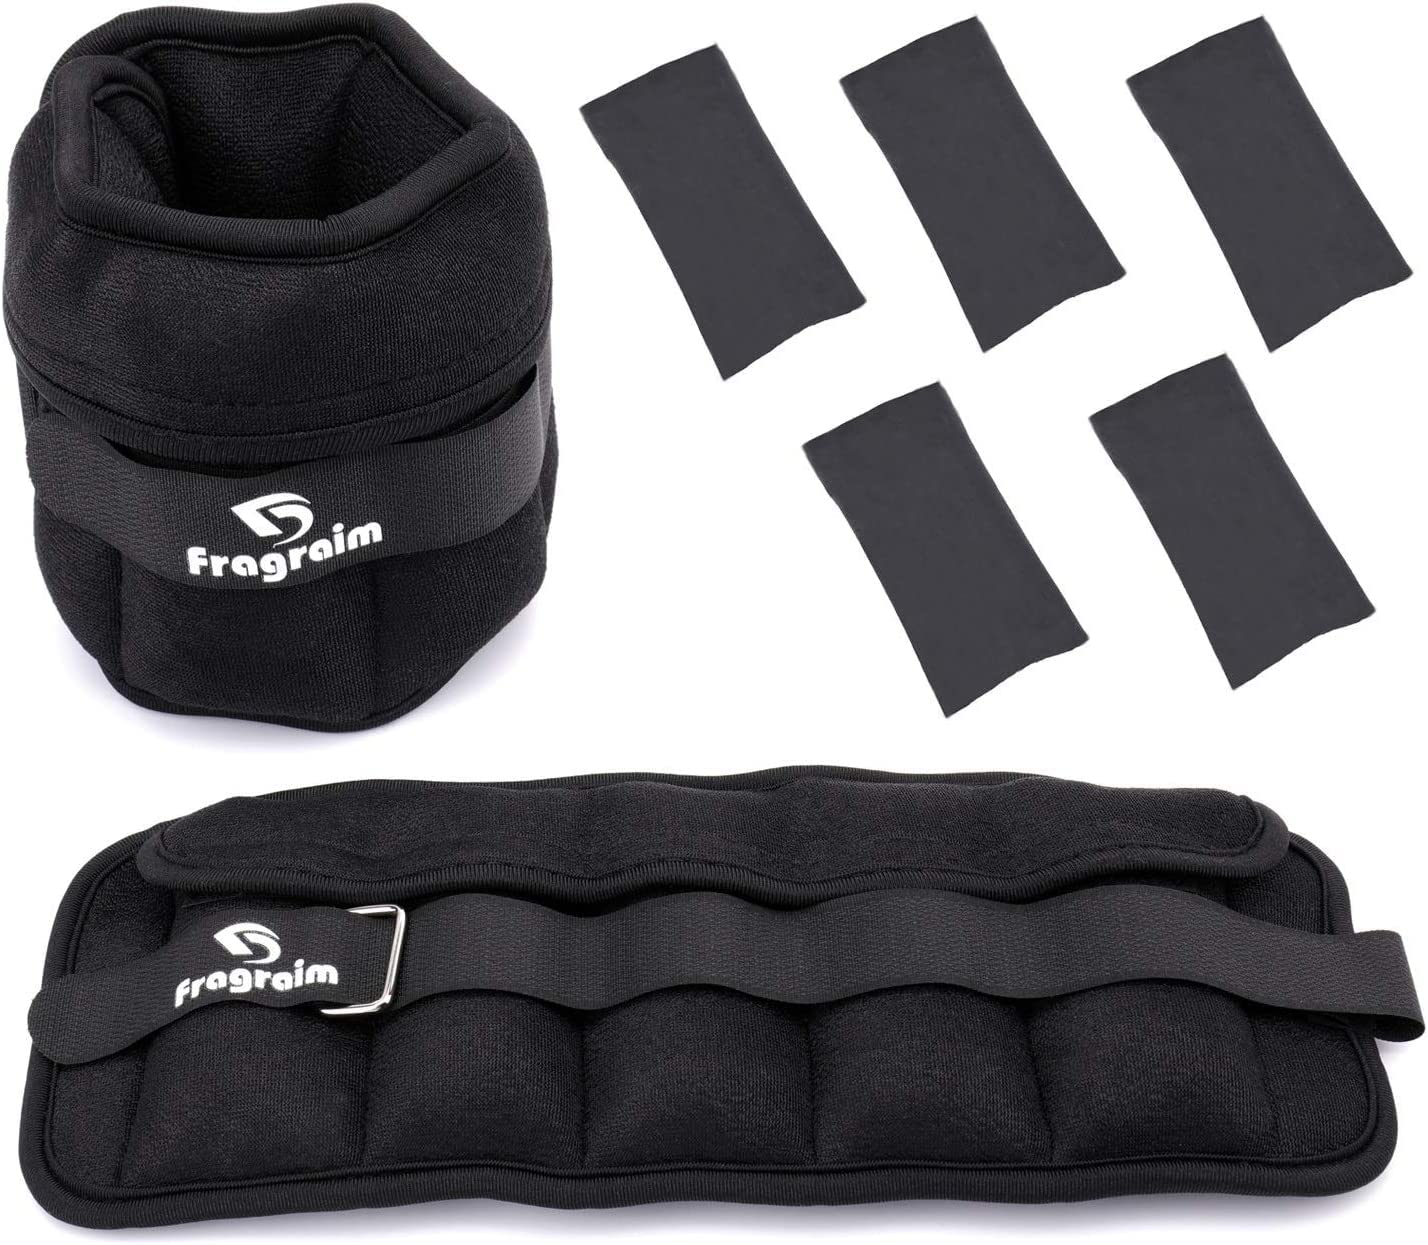 Fragraim ankle weight 5 -step adjustment 2 piece collection most small 1.5kg- maximum 8kg.tore weight -ply . wrist pair neck power ankle weight adjustment possibility one leg 